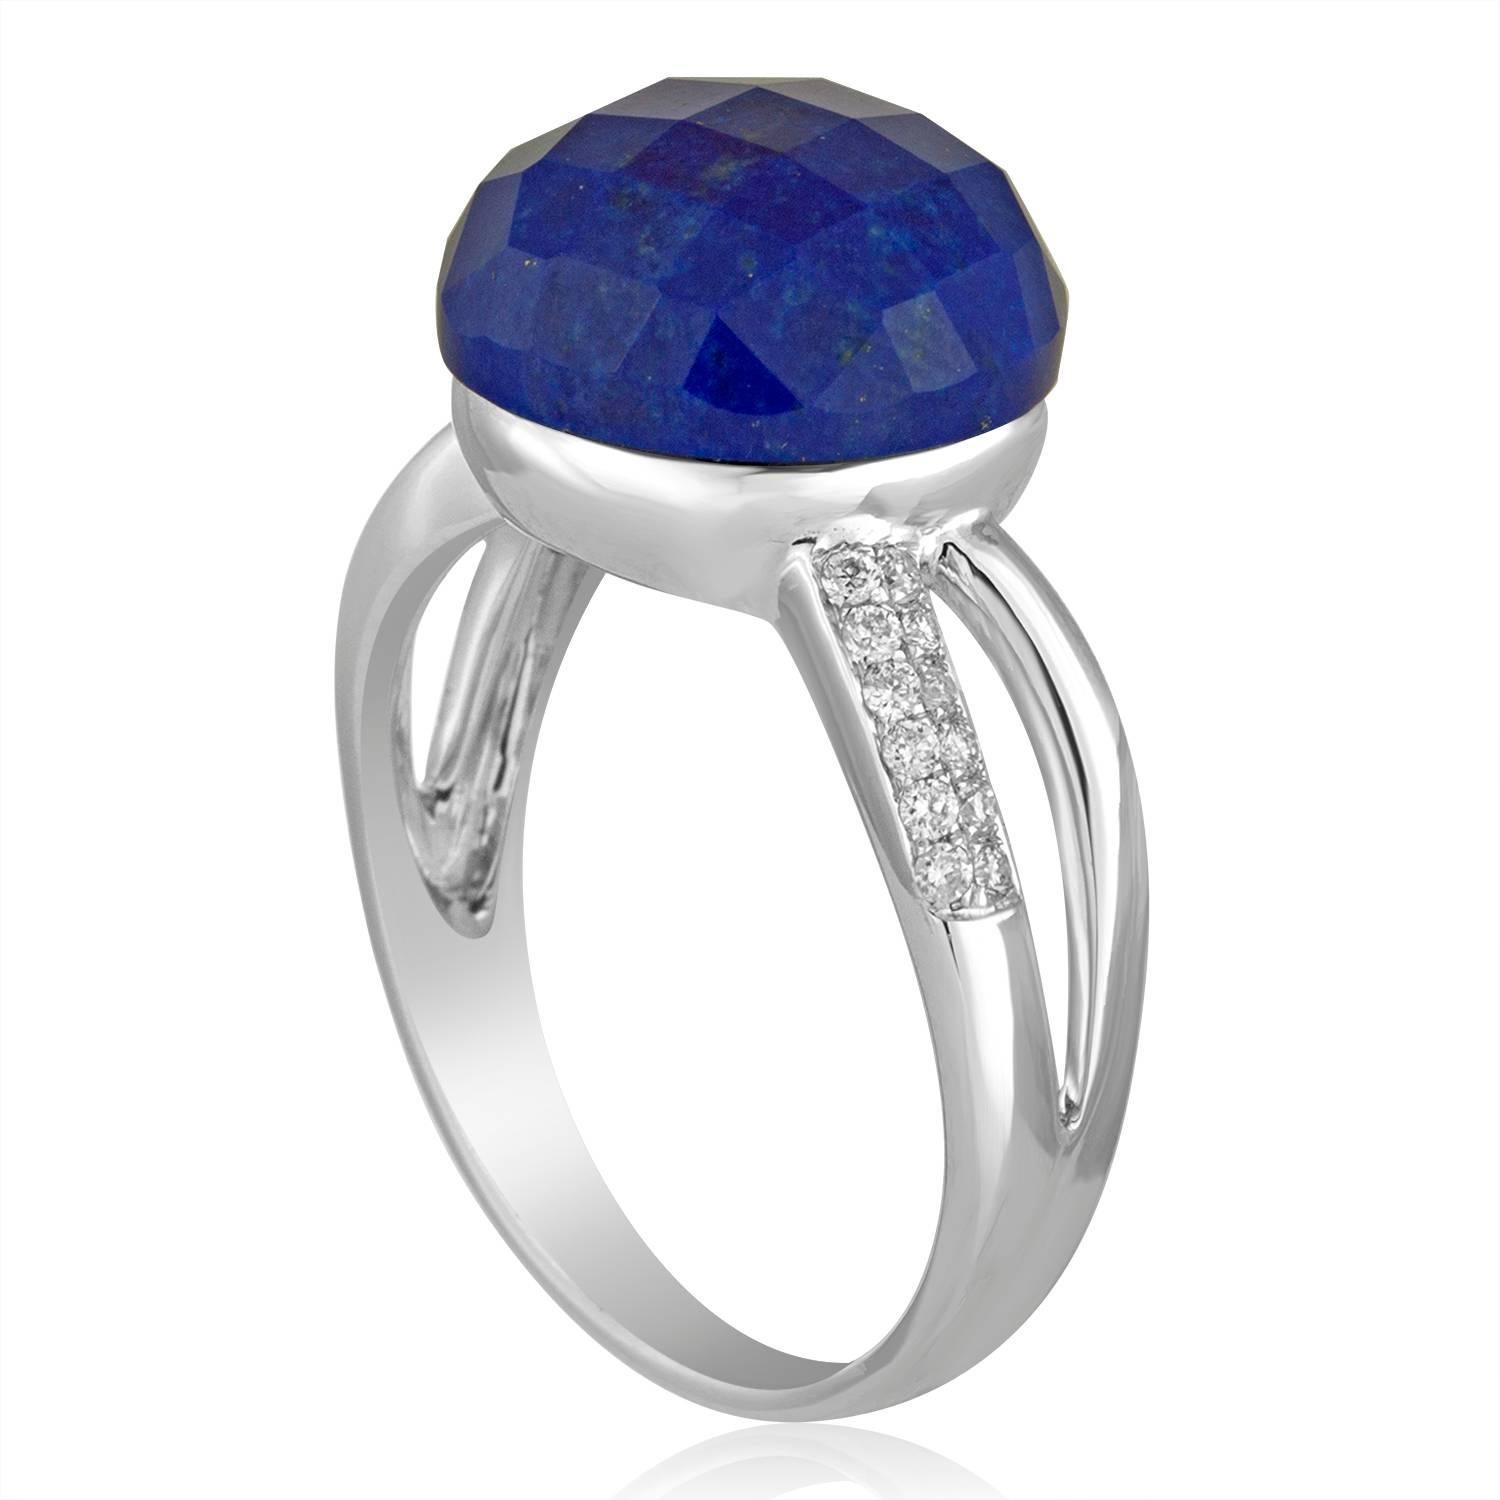 Beautifully Ring
The ring is 14K White Gold
There are 0.14 Carats In Diamonds G/H SI
The Center Stone is a Round Faceted Cabochon Lapis Lazuli 7.37 Carats
The ring measures on top 7/16